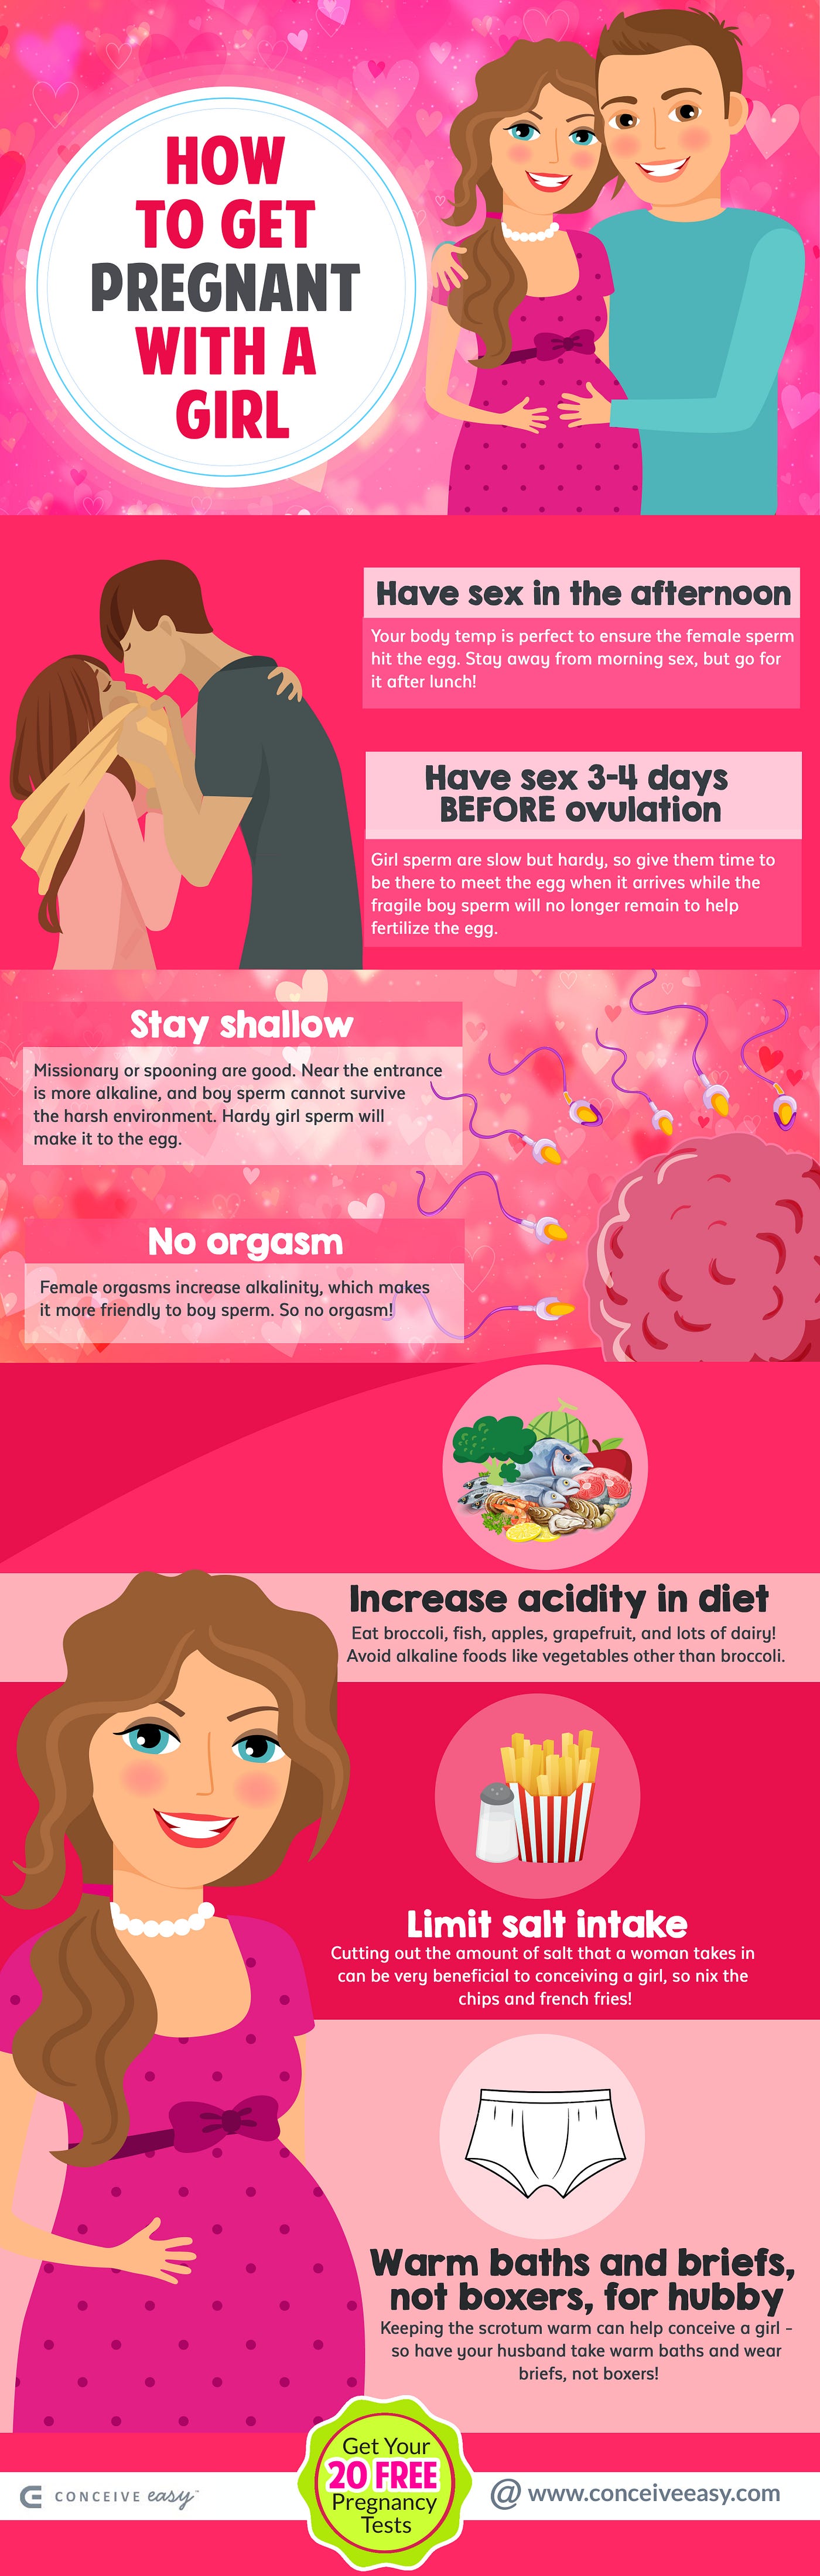 7 Tips How to Get Pregnant with a Girl Infographic | by Conceive Easy ...